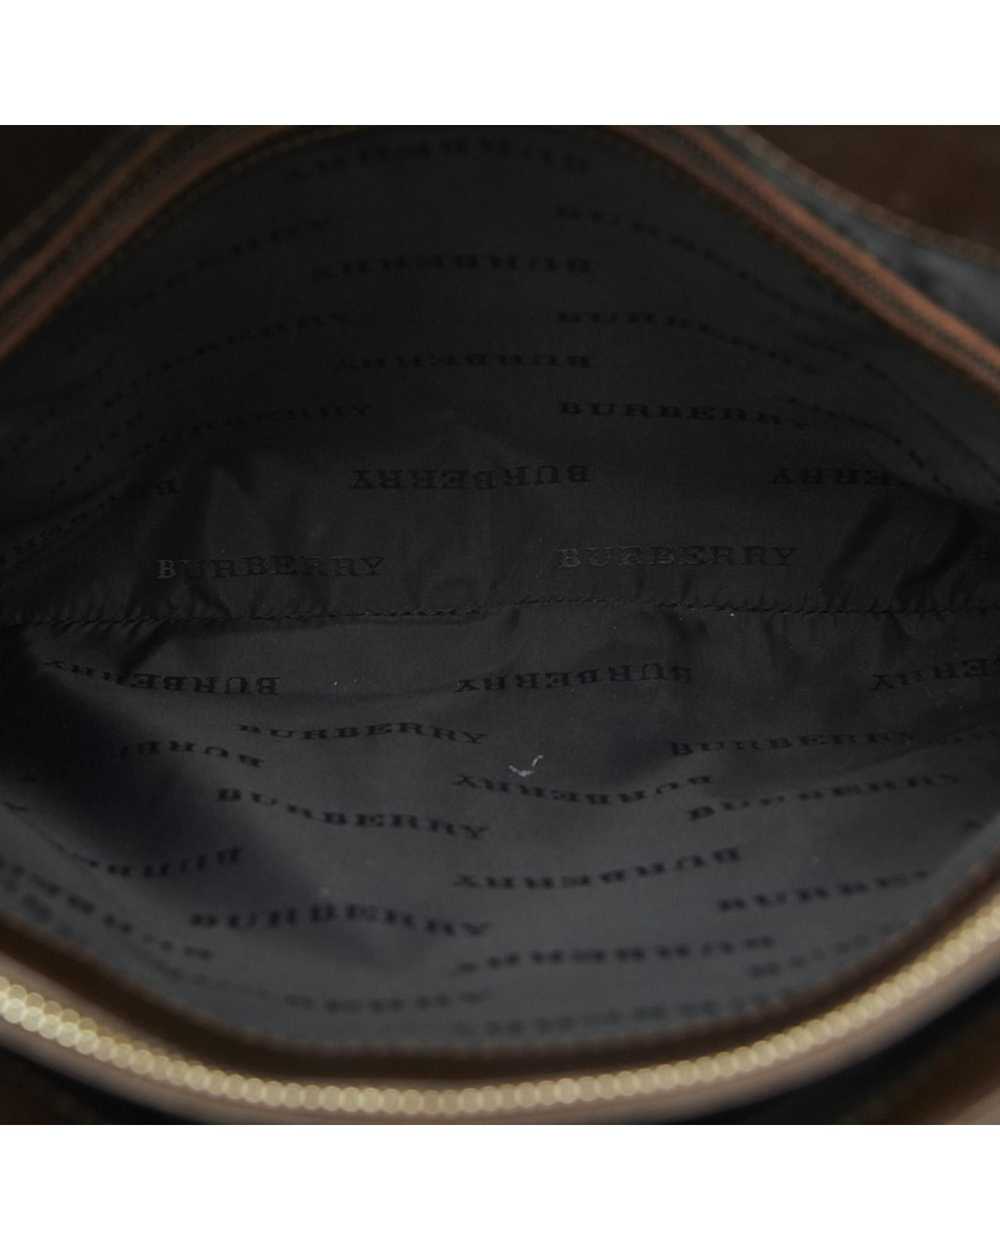 Burberry Classic Check Tote Bag in Brown - image 8